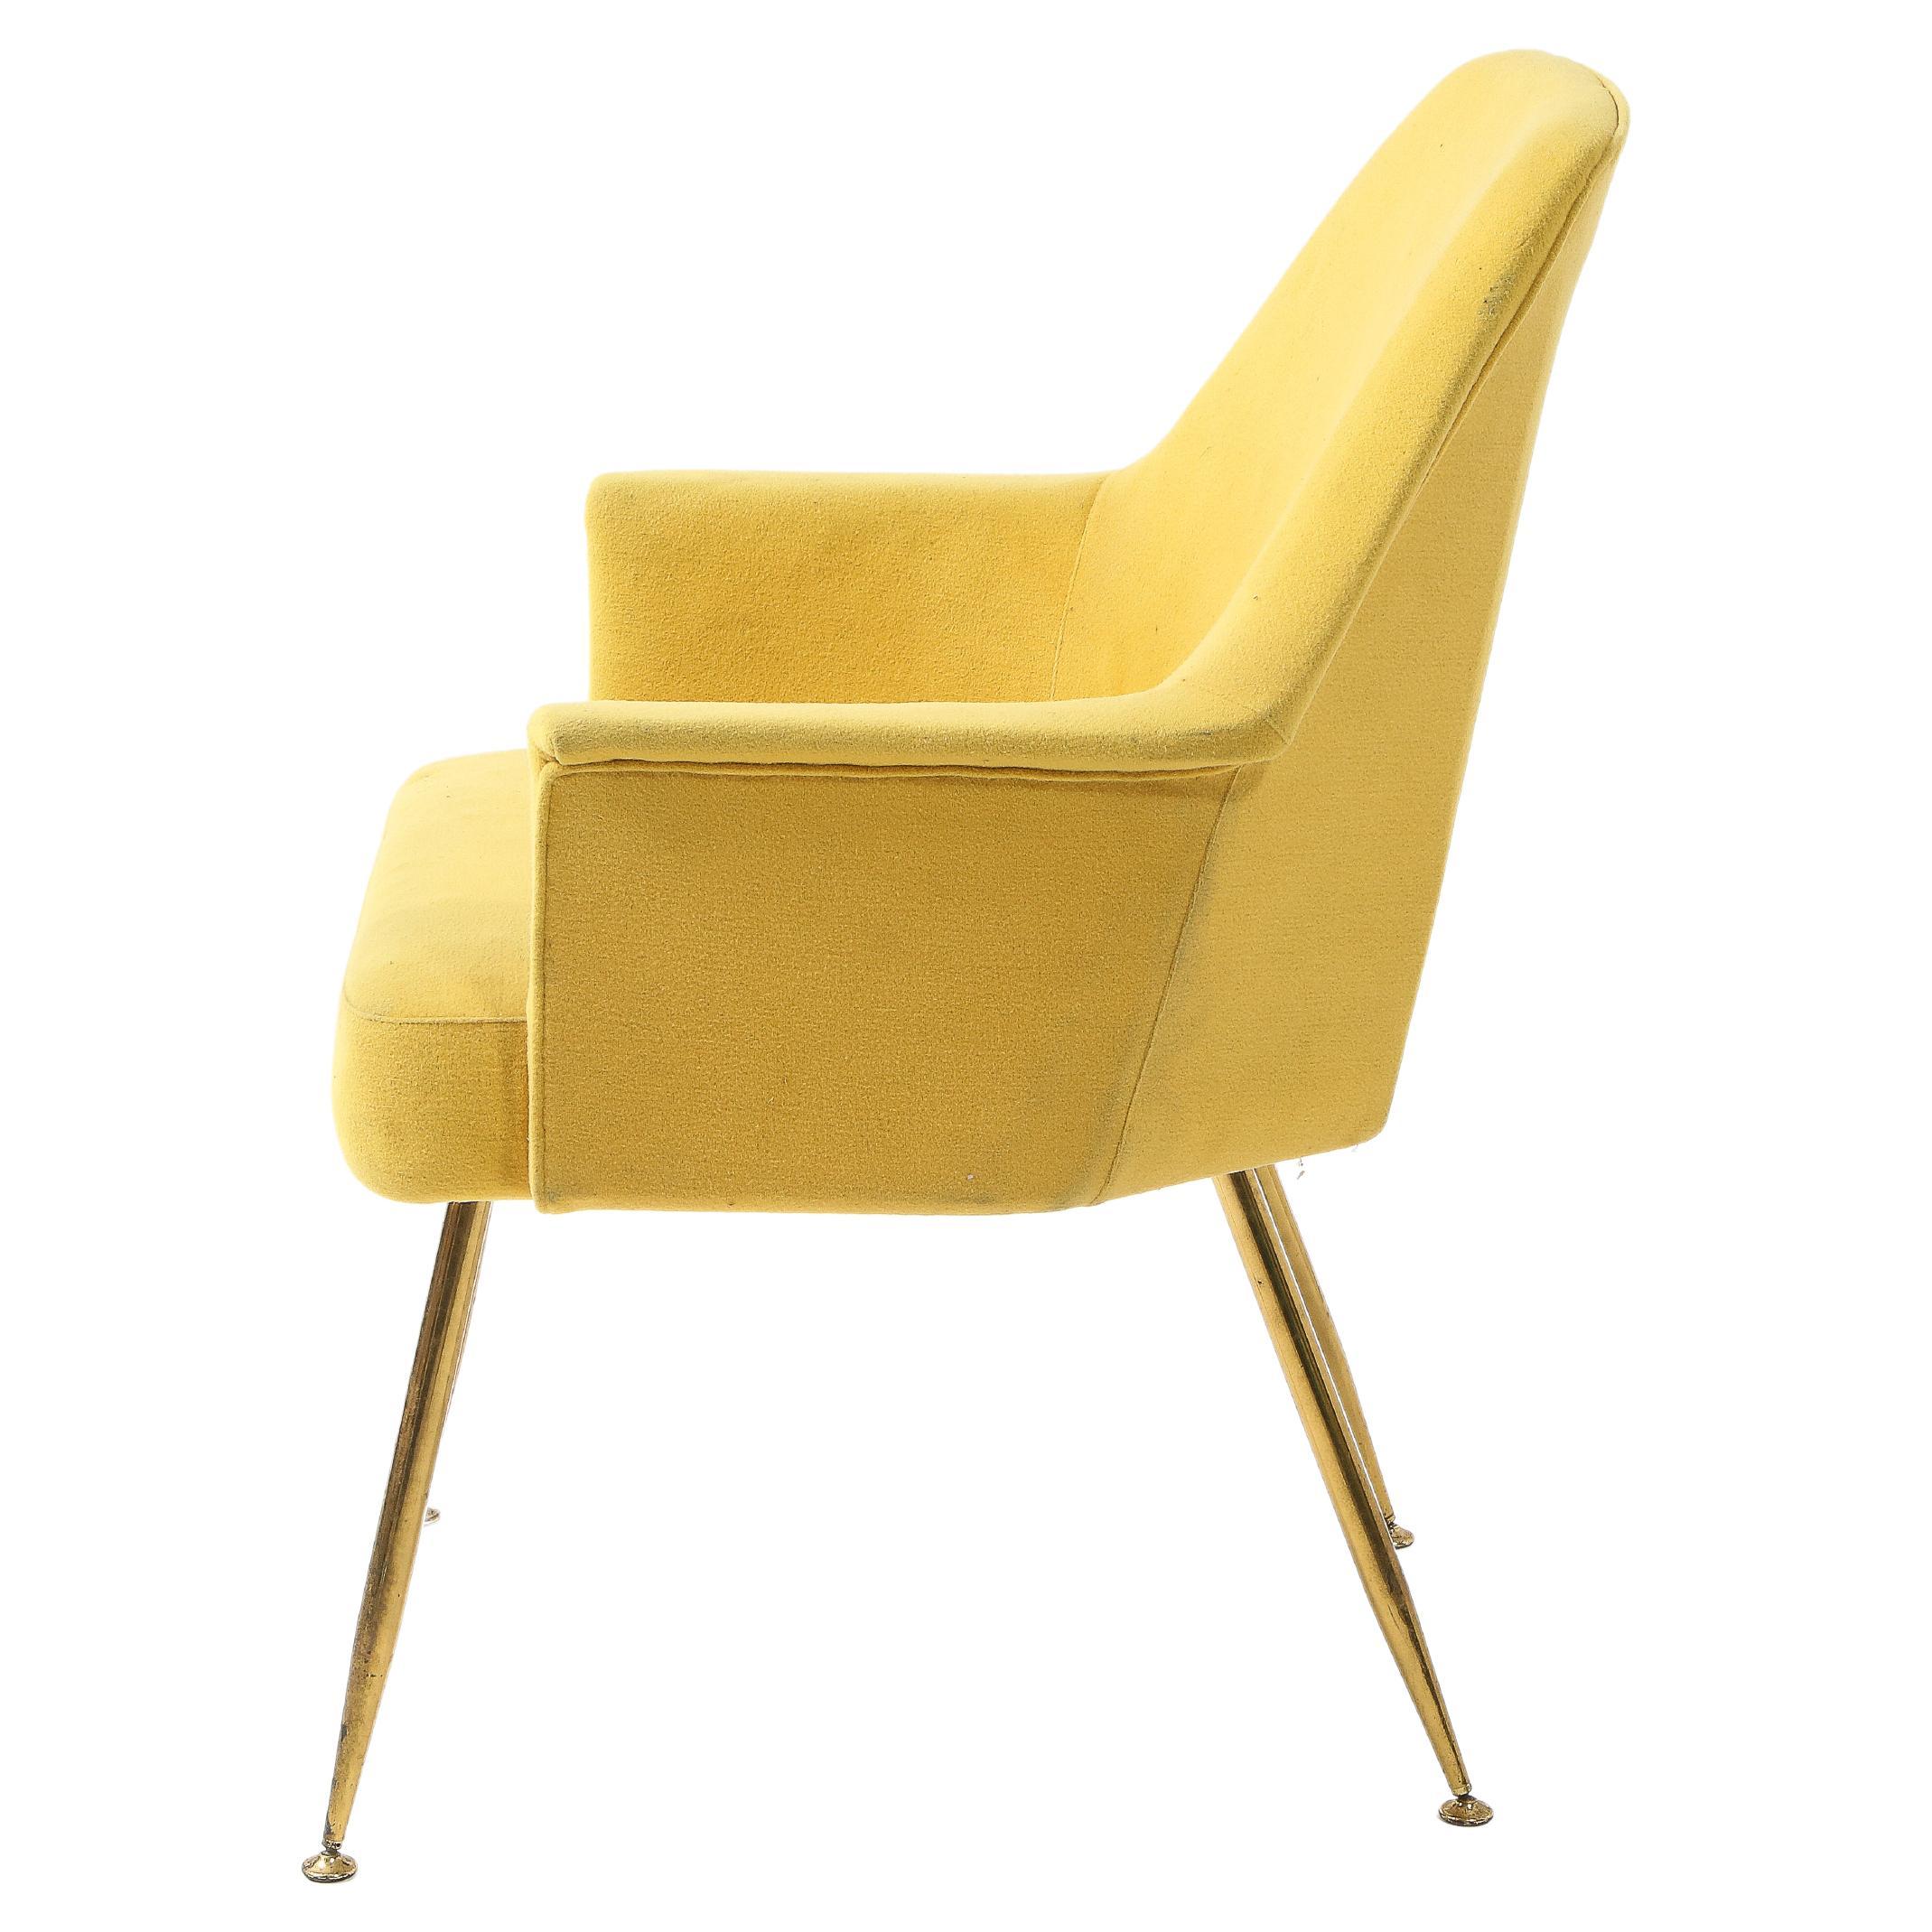 Carlo Pagani for Arflex "Campanula" Singe Dining Chair with Arms, Italy 1960's For Sale